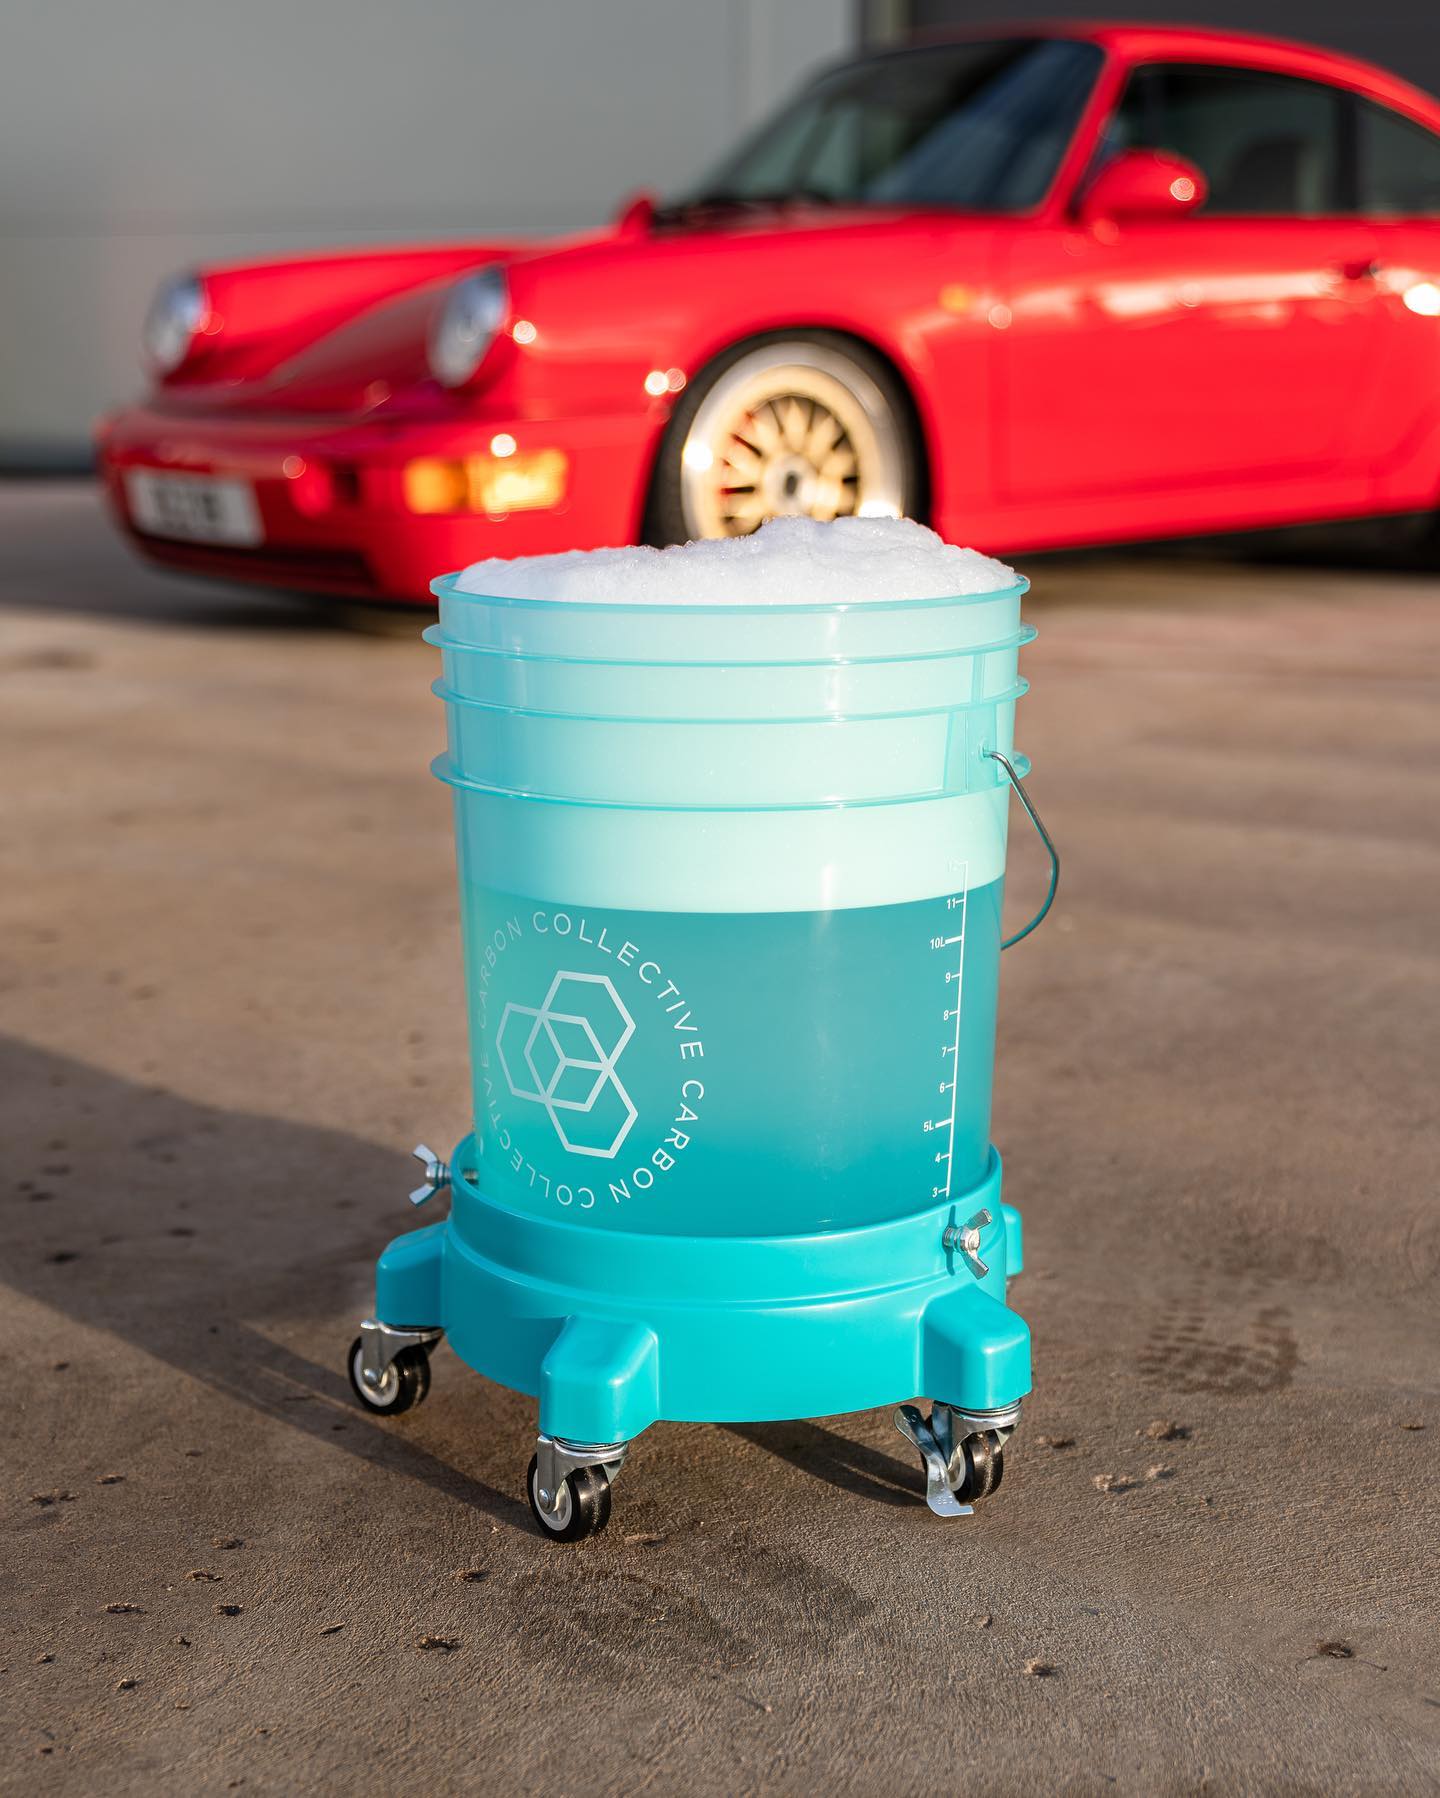 Carbon Collective Clear Teal Detailing Bucket